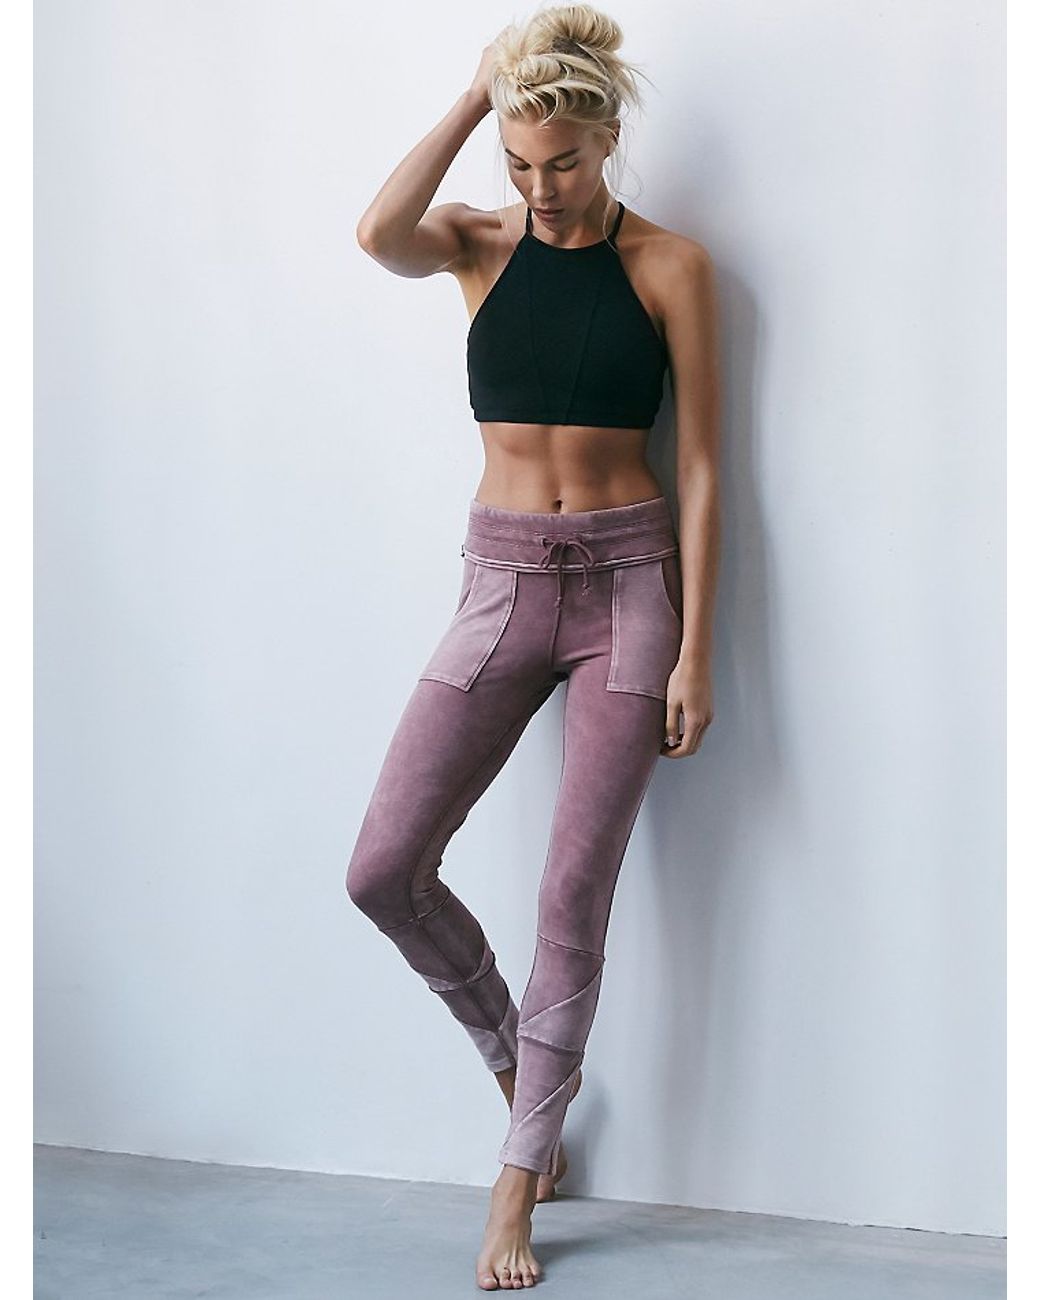 Free People - FP Movement - Kyoto Athletic Leggings - Washed